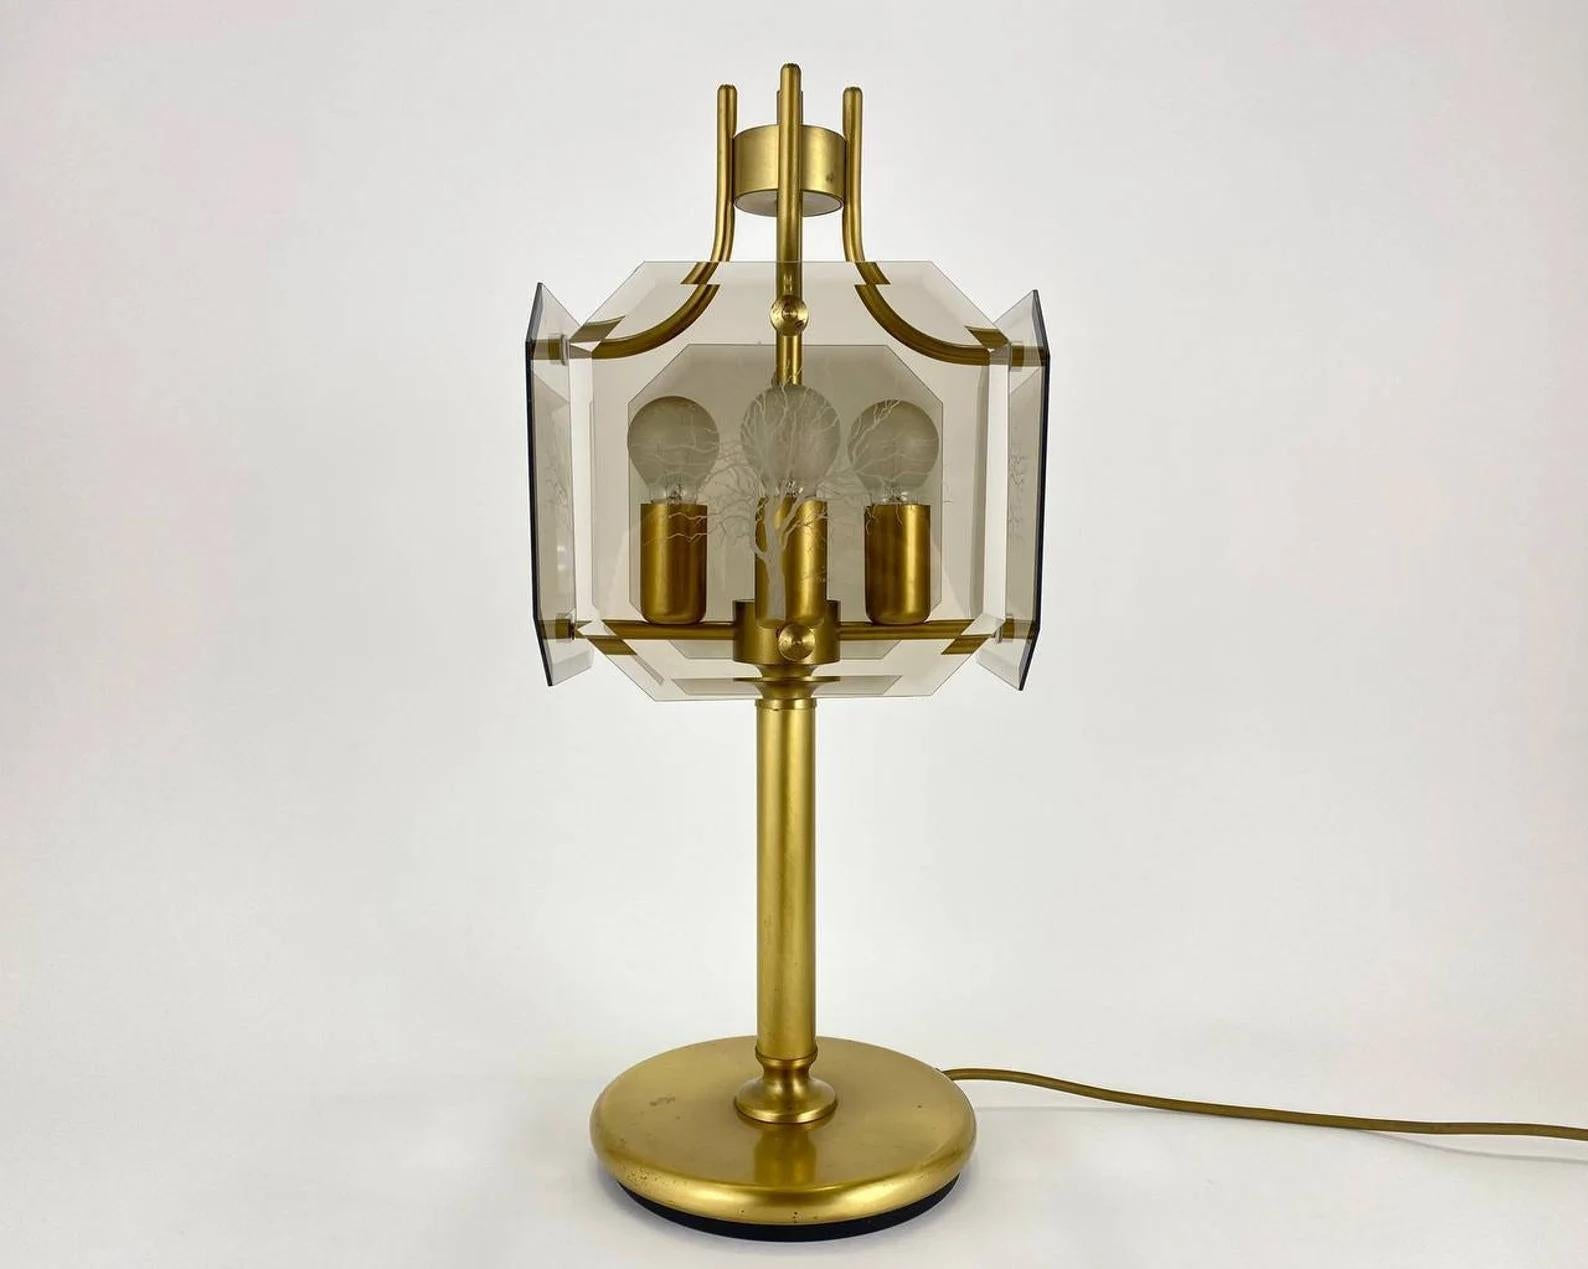 German Vintage Table Lamp by Luigi Colani for Sische 1